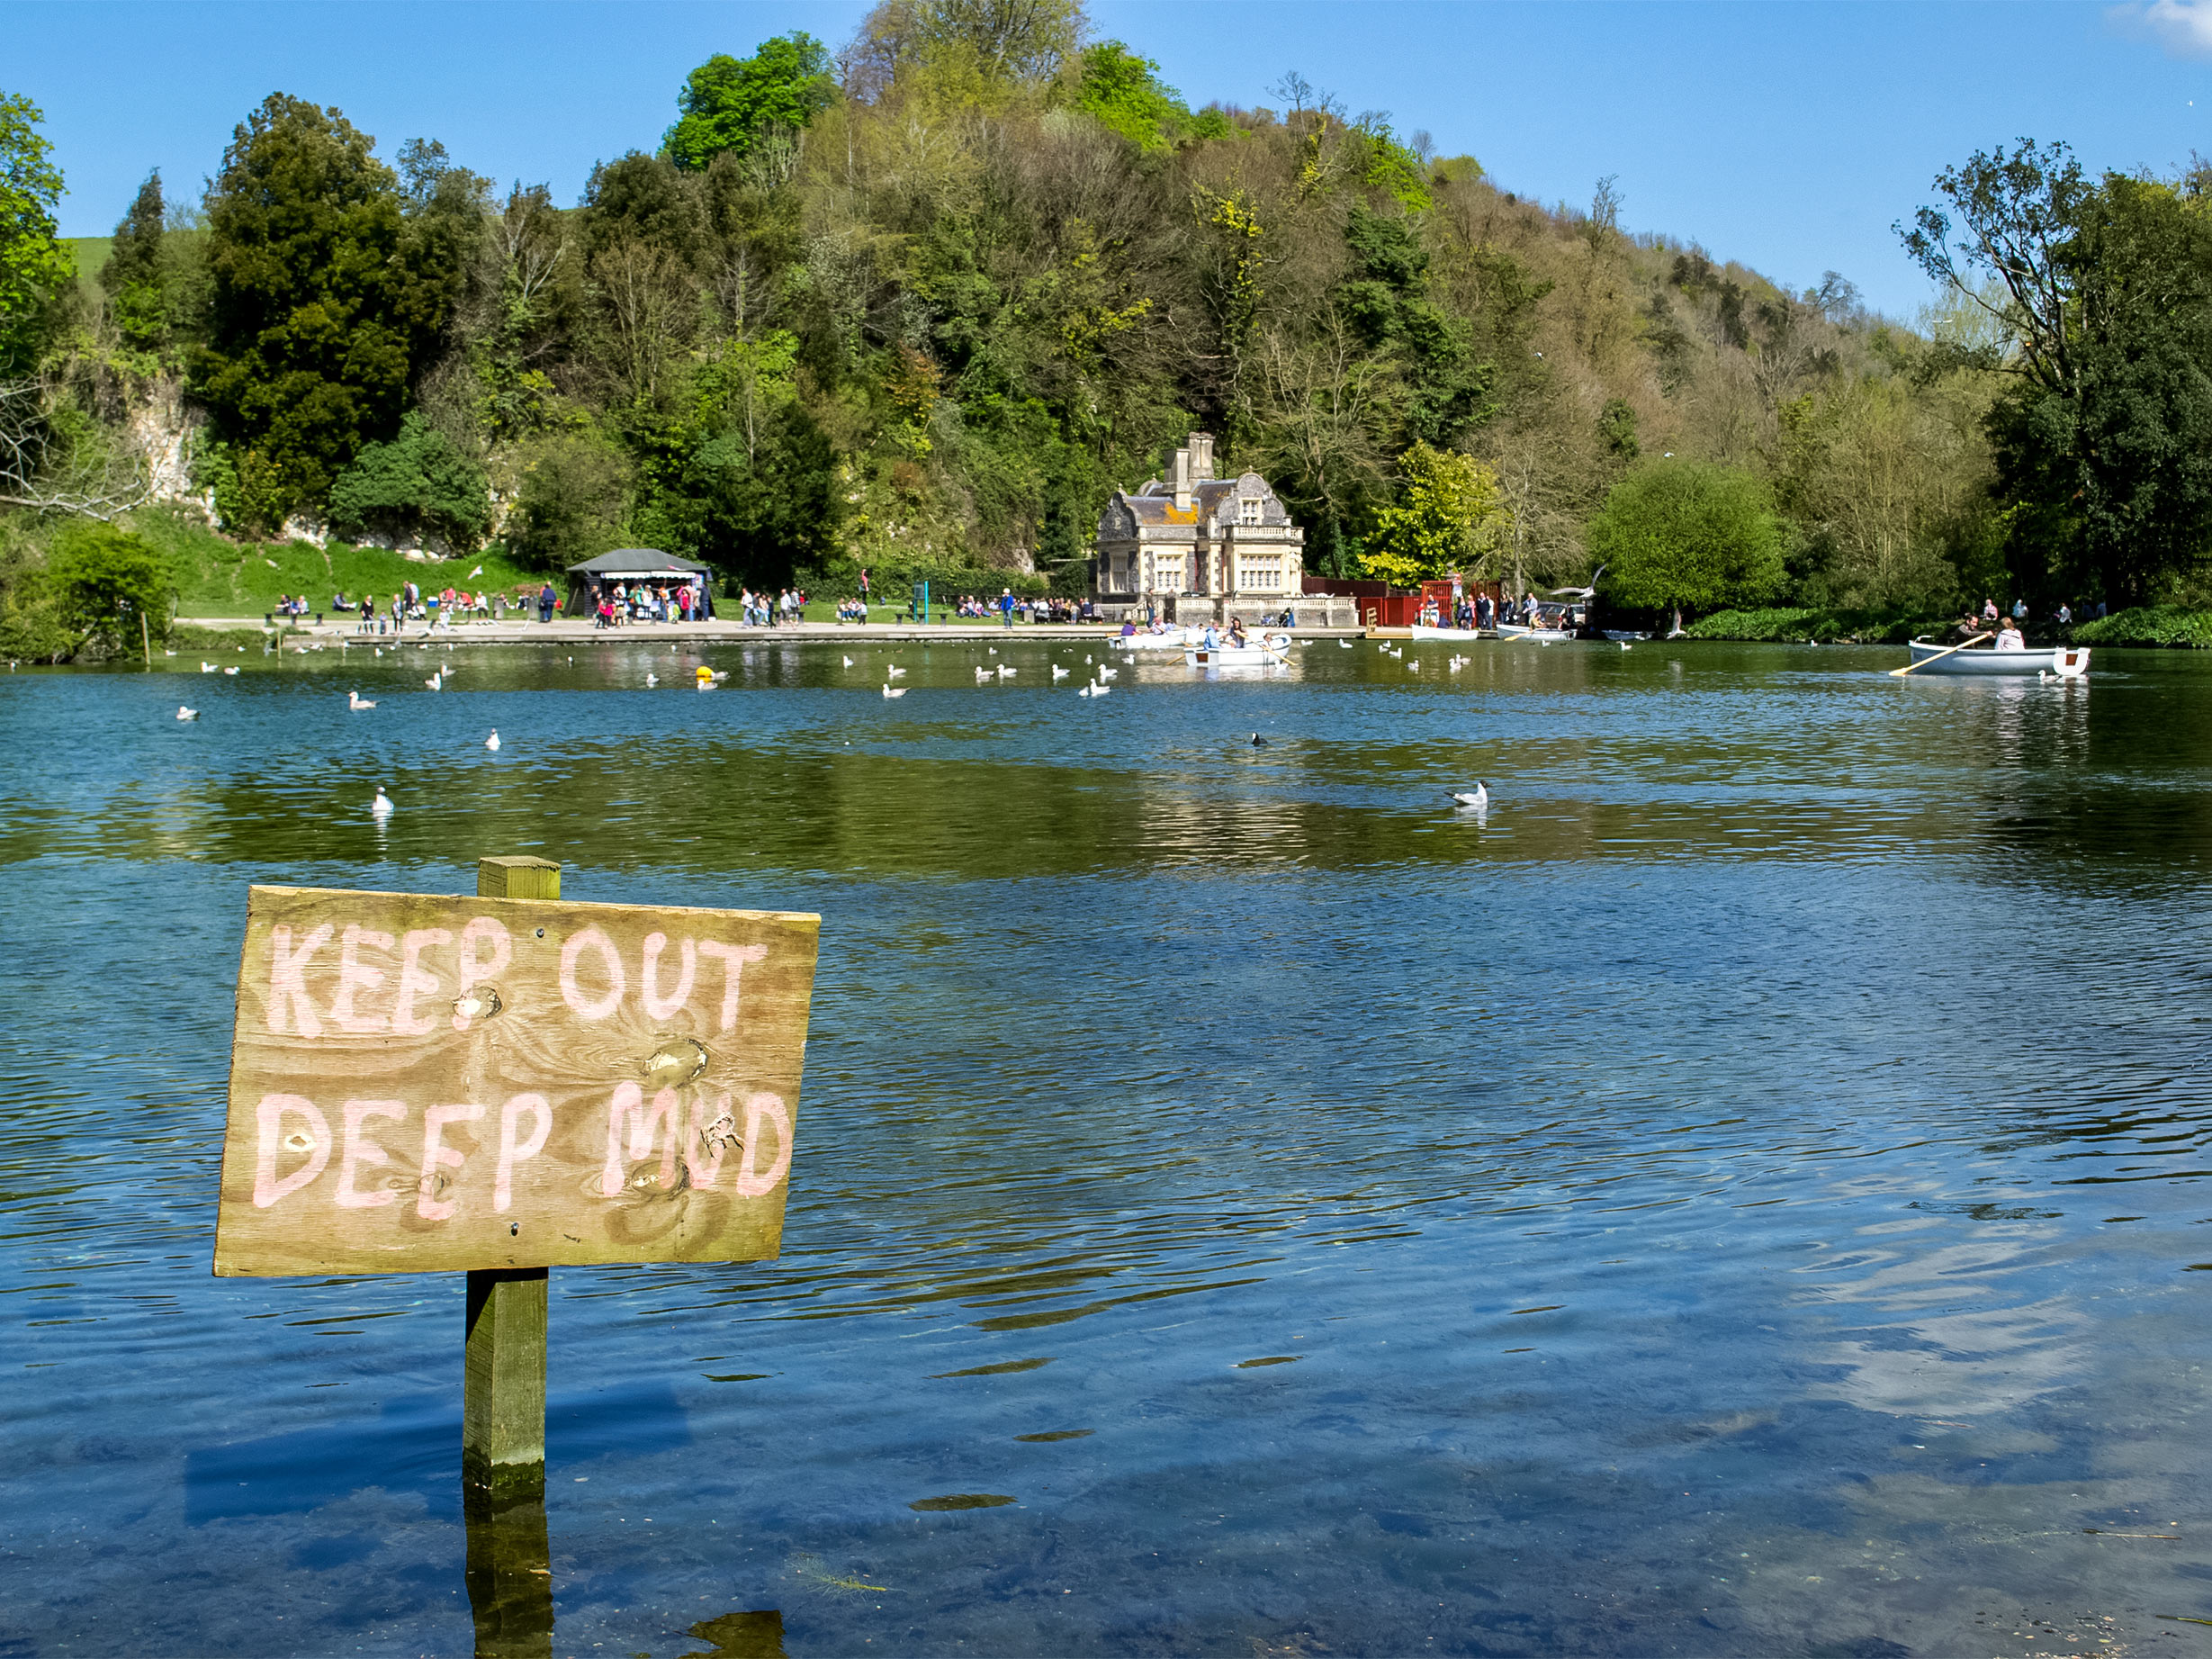 Sign in the water Swanbourne Lake South Downs UK